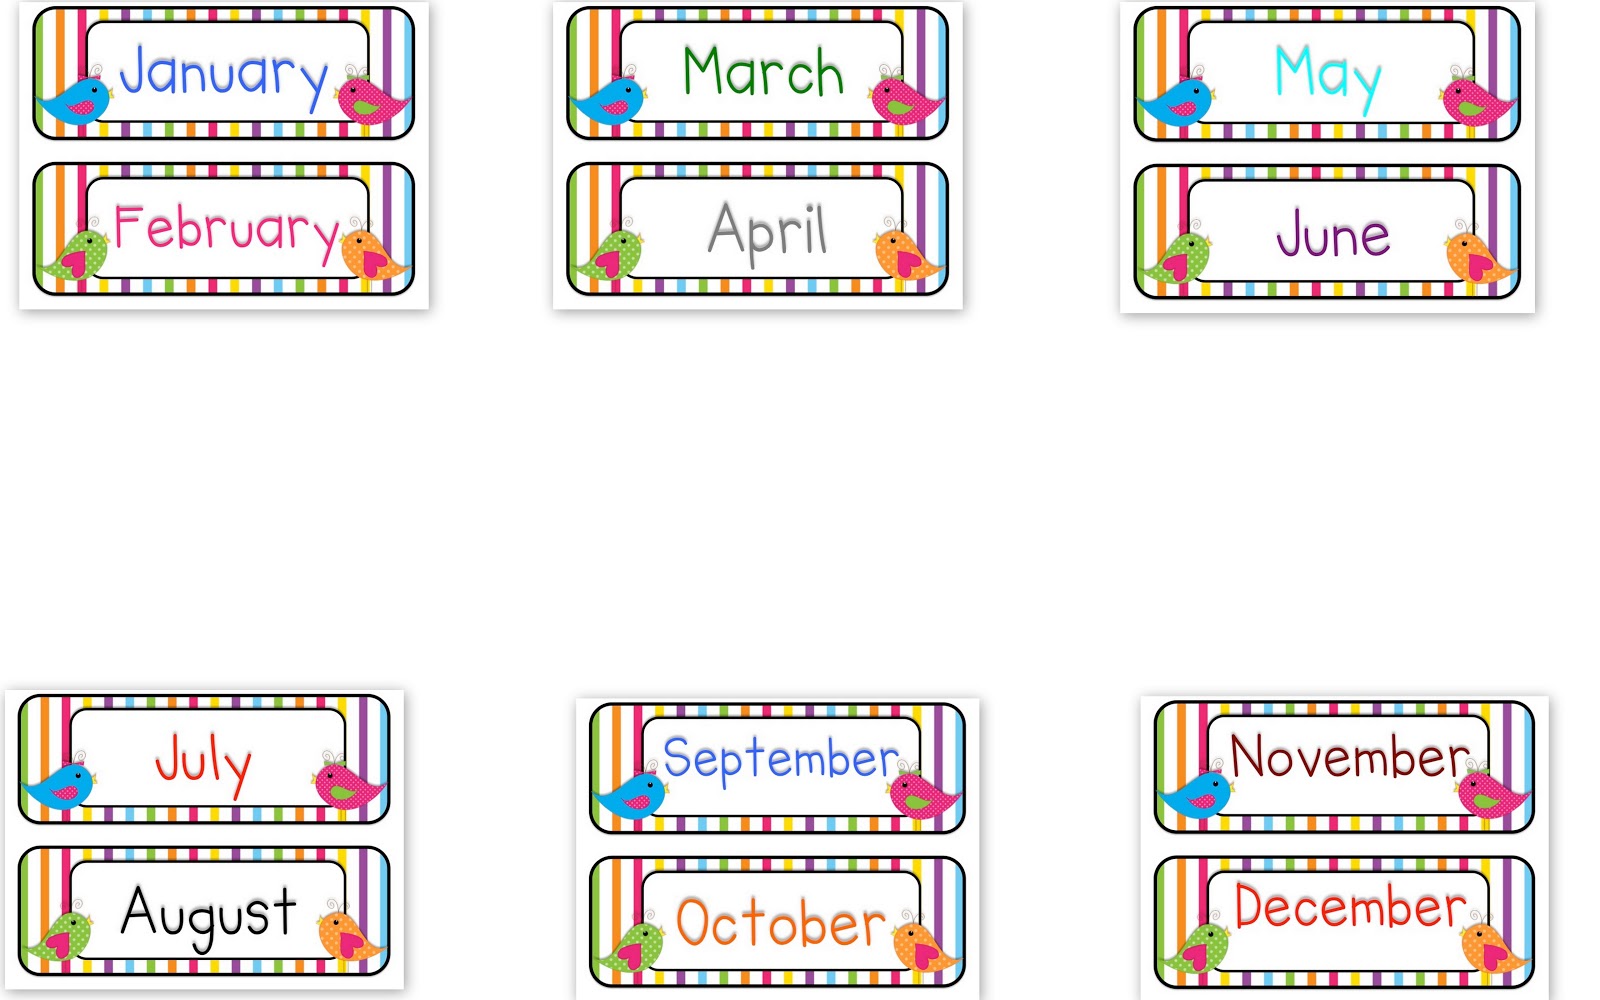 Months of the Year clip art .